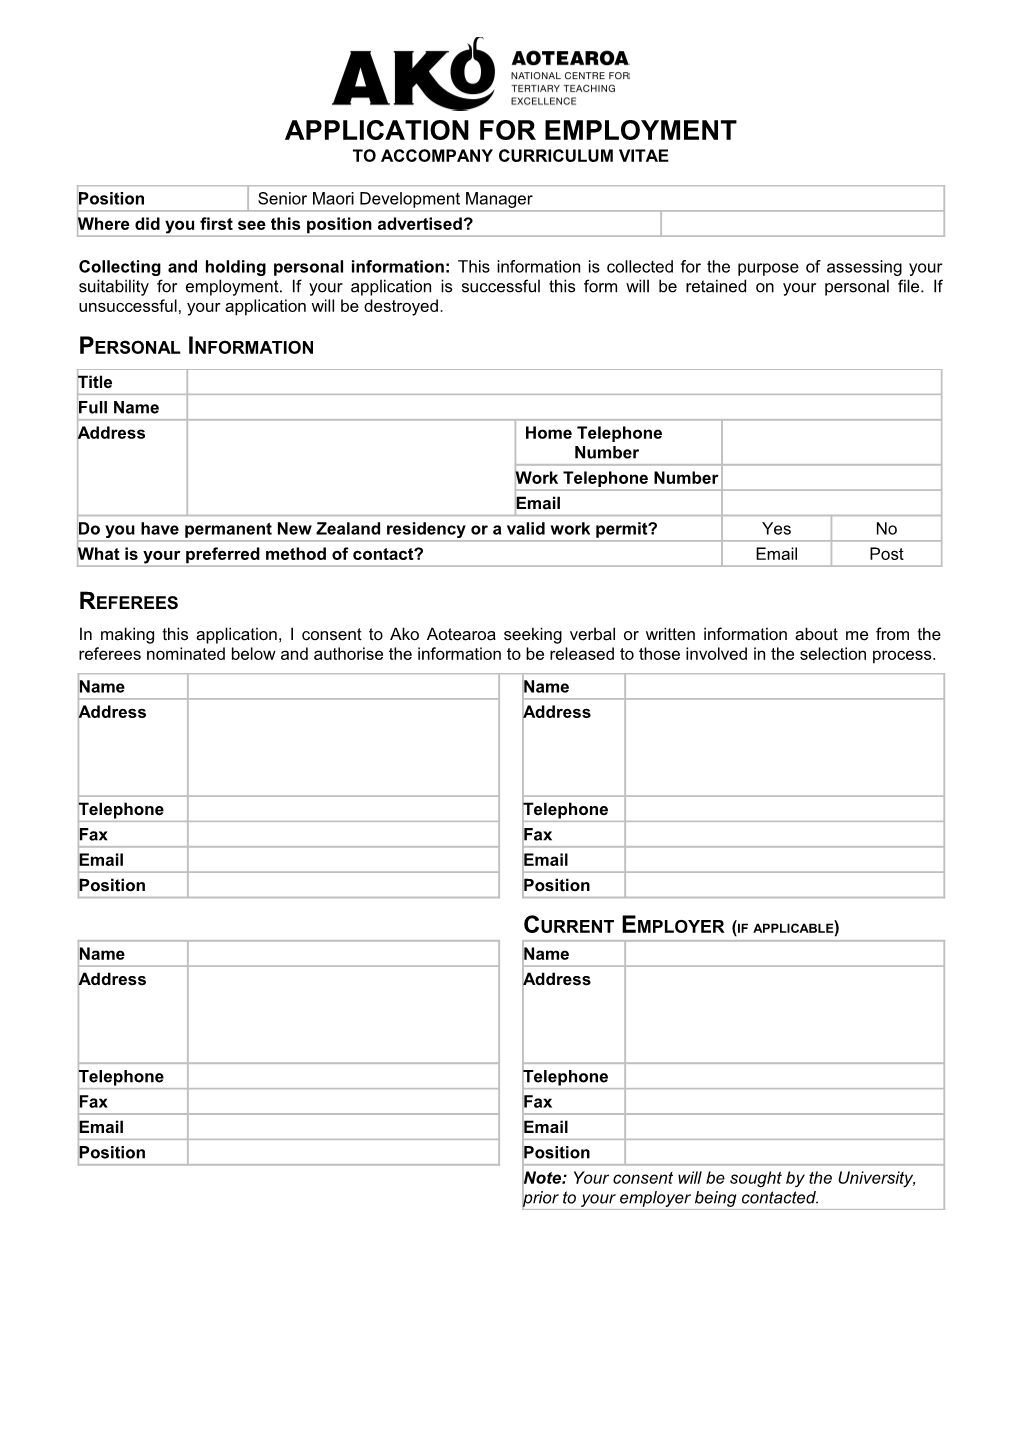 Application for Employment s158